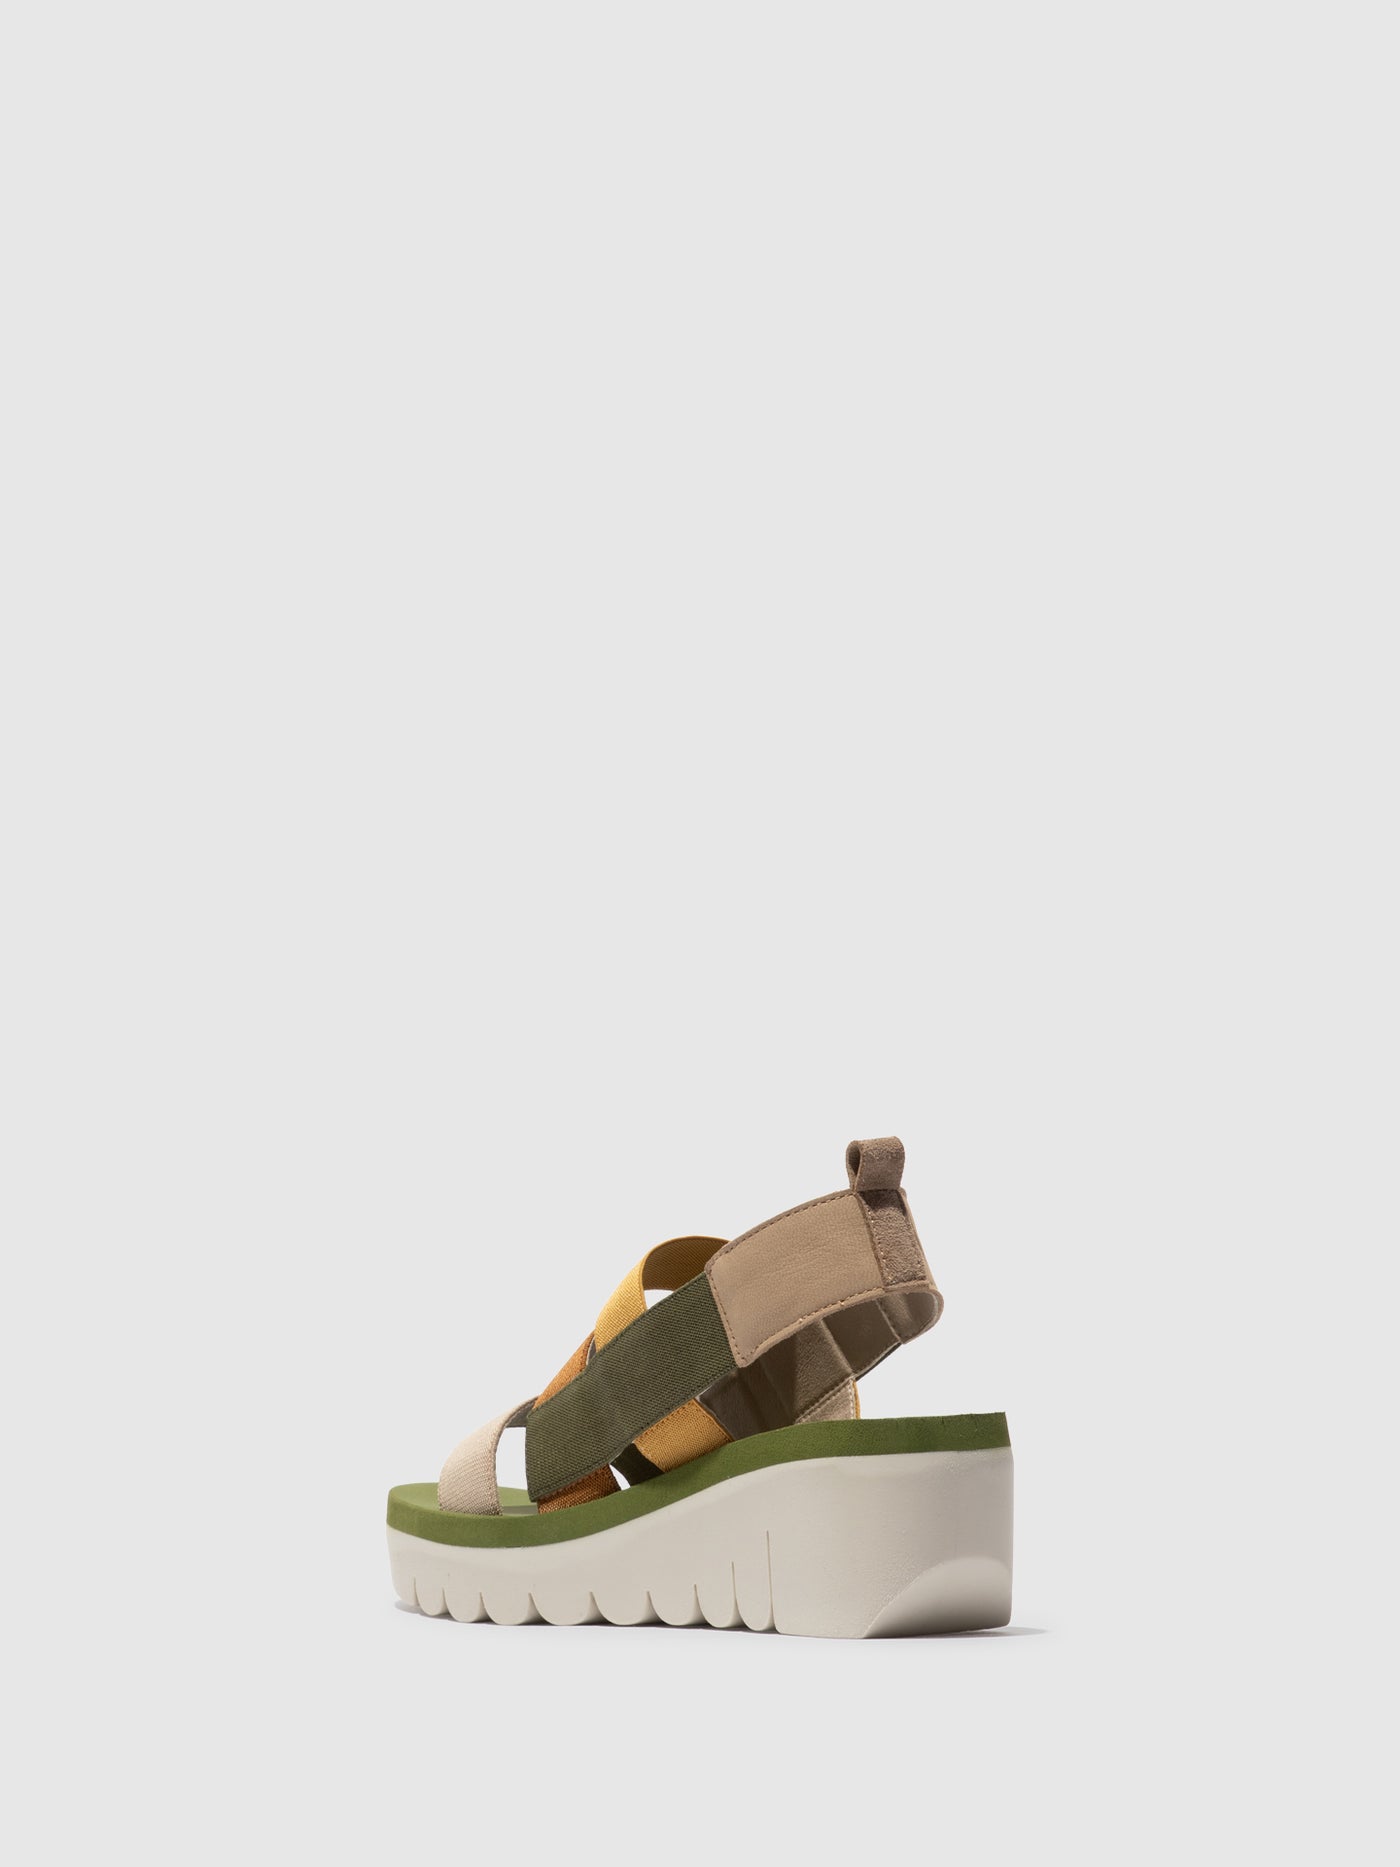 Strappy Sandals YERE847FLY CLOUD/MULTICOLOR/ARMY GREEN